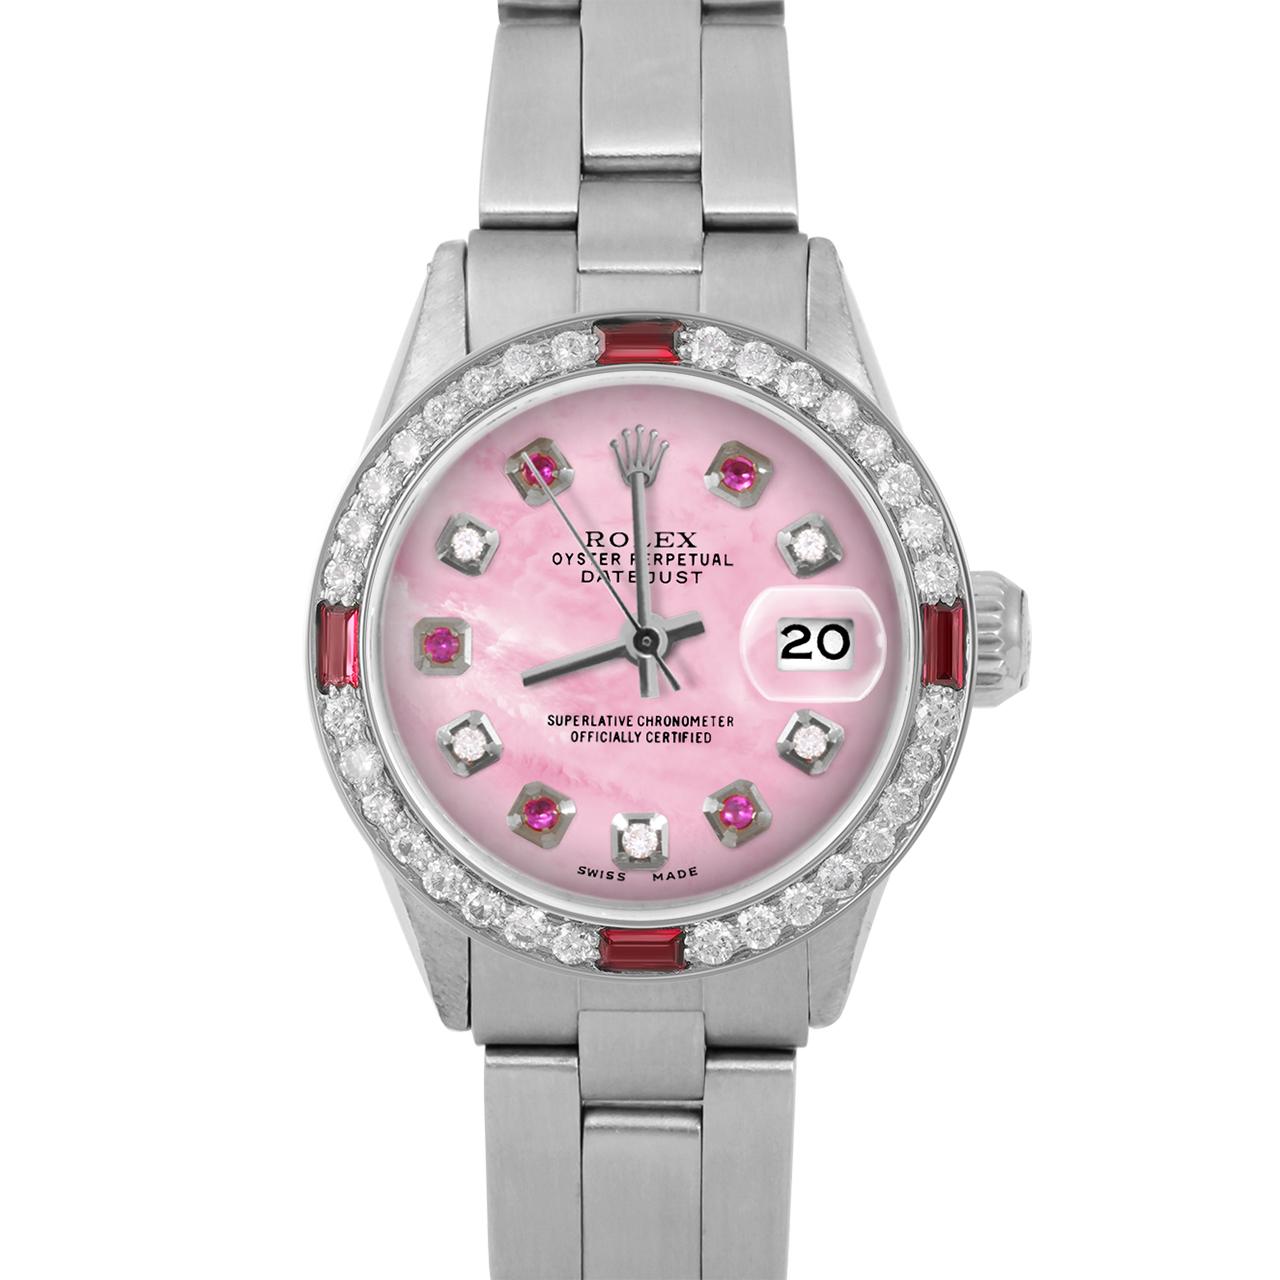 Brand : Rolex
Model : Datejust (Non-Quickset Model)
Gender : Ladies
Metals : Stainless Steel
Case Size : 24 mm

Dial : Custom Pink Mother Of Pearl Diamond Ruby Dial (This dial is not original Rolex And has been added aftermarket yet is a beautiful